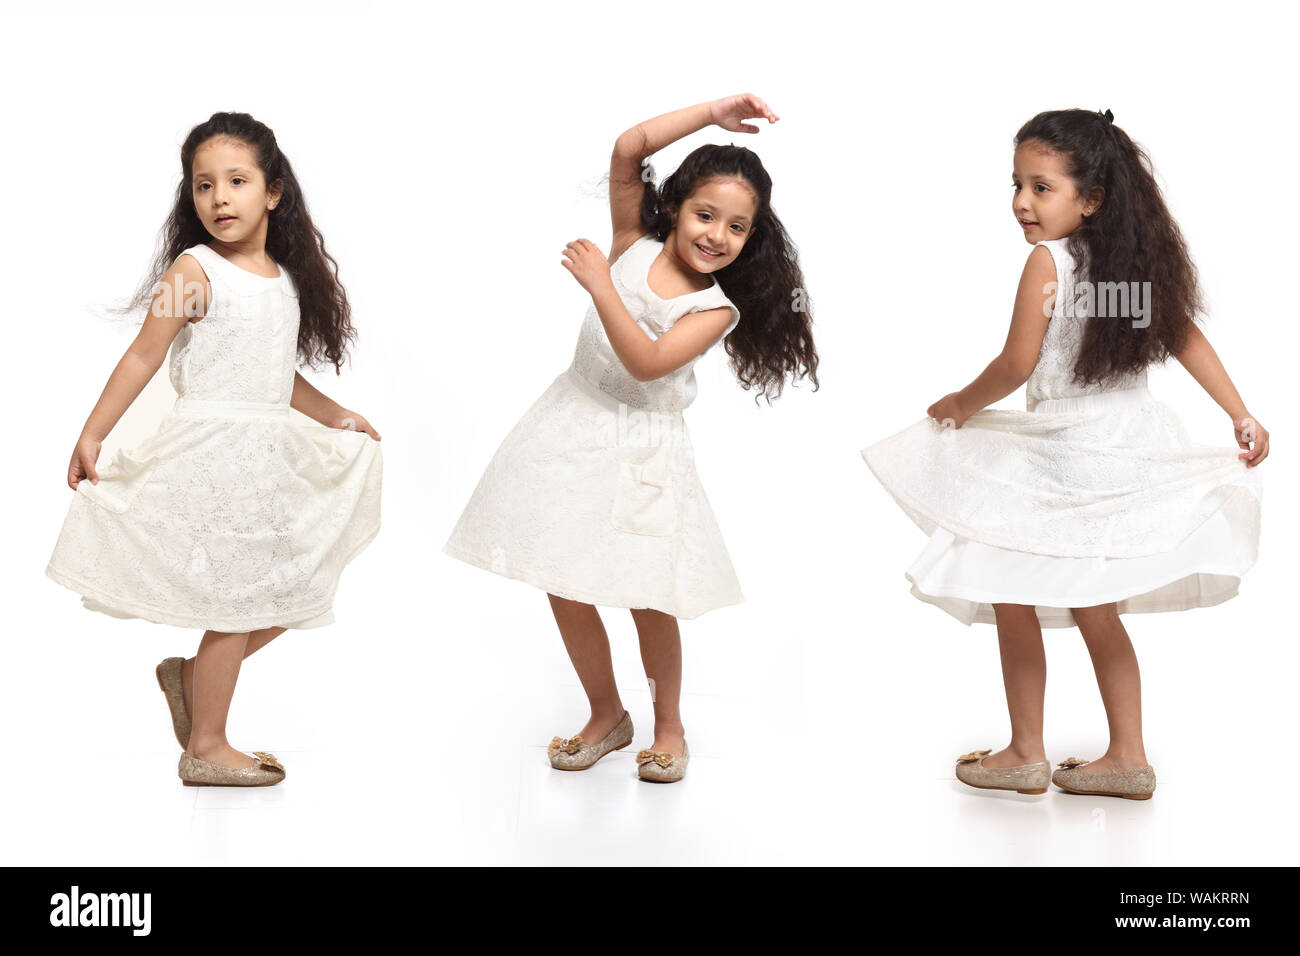 Multiple image of a girl dancing Stock Photo